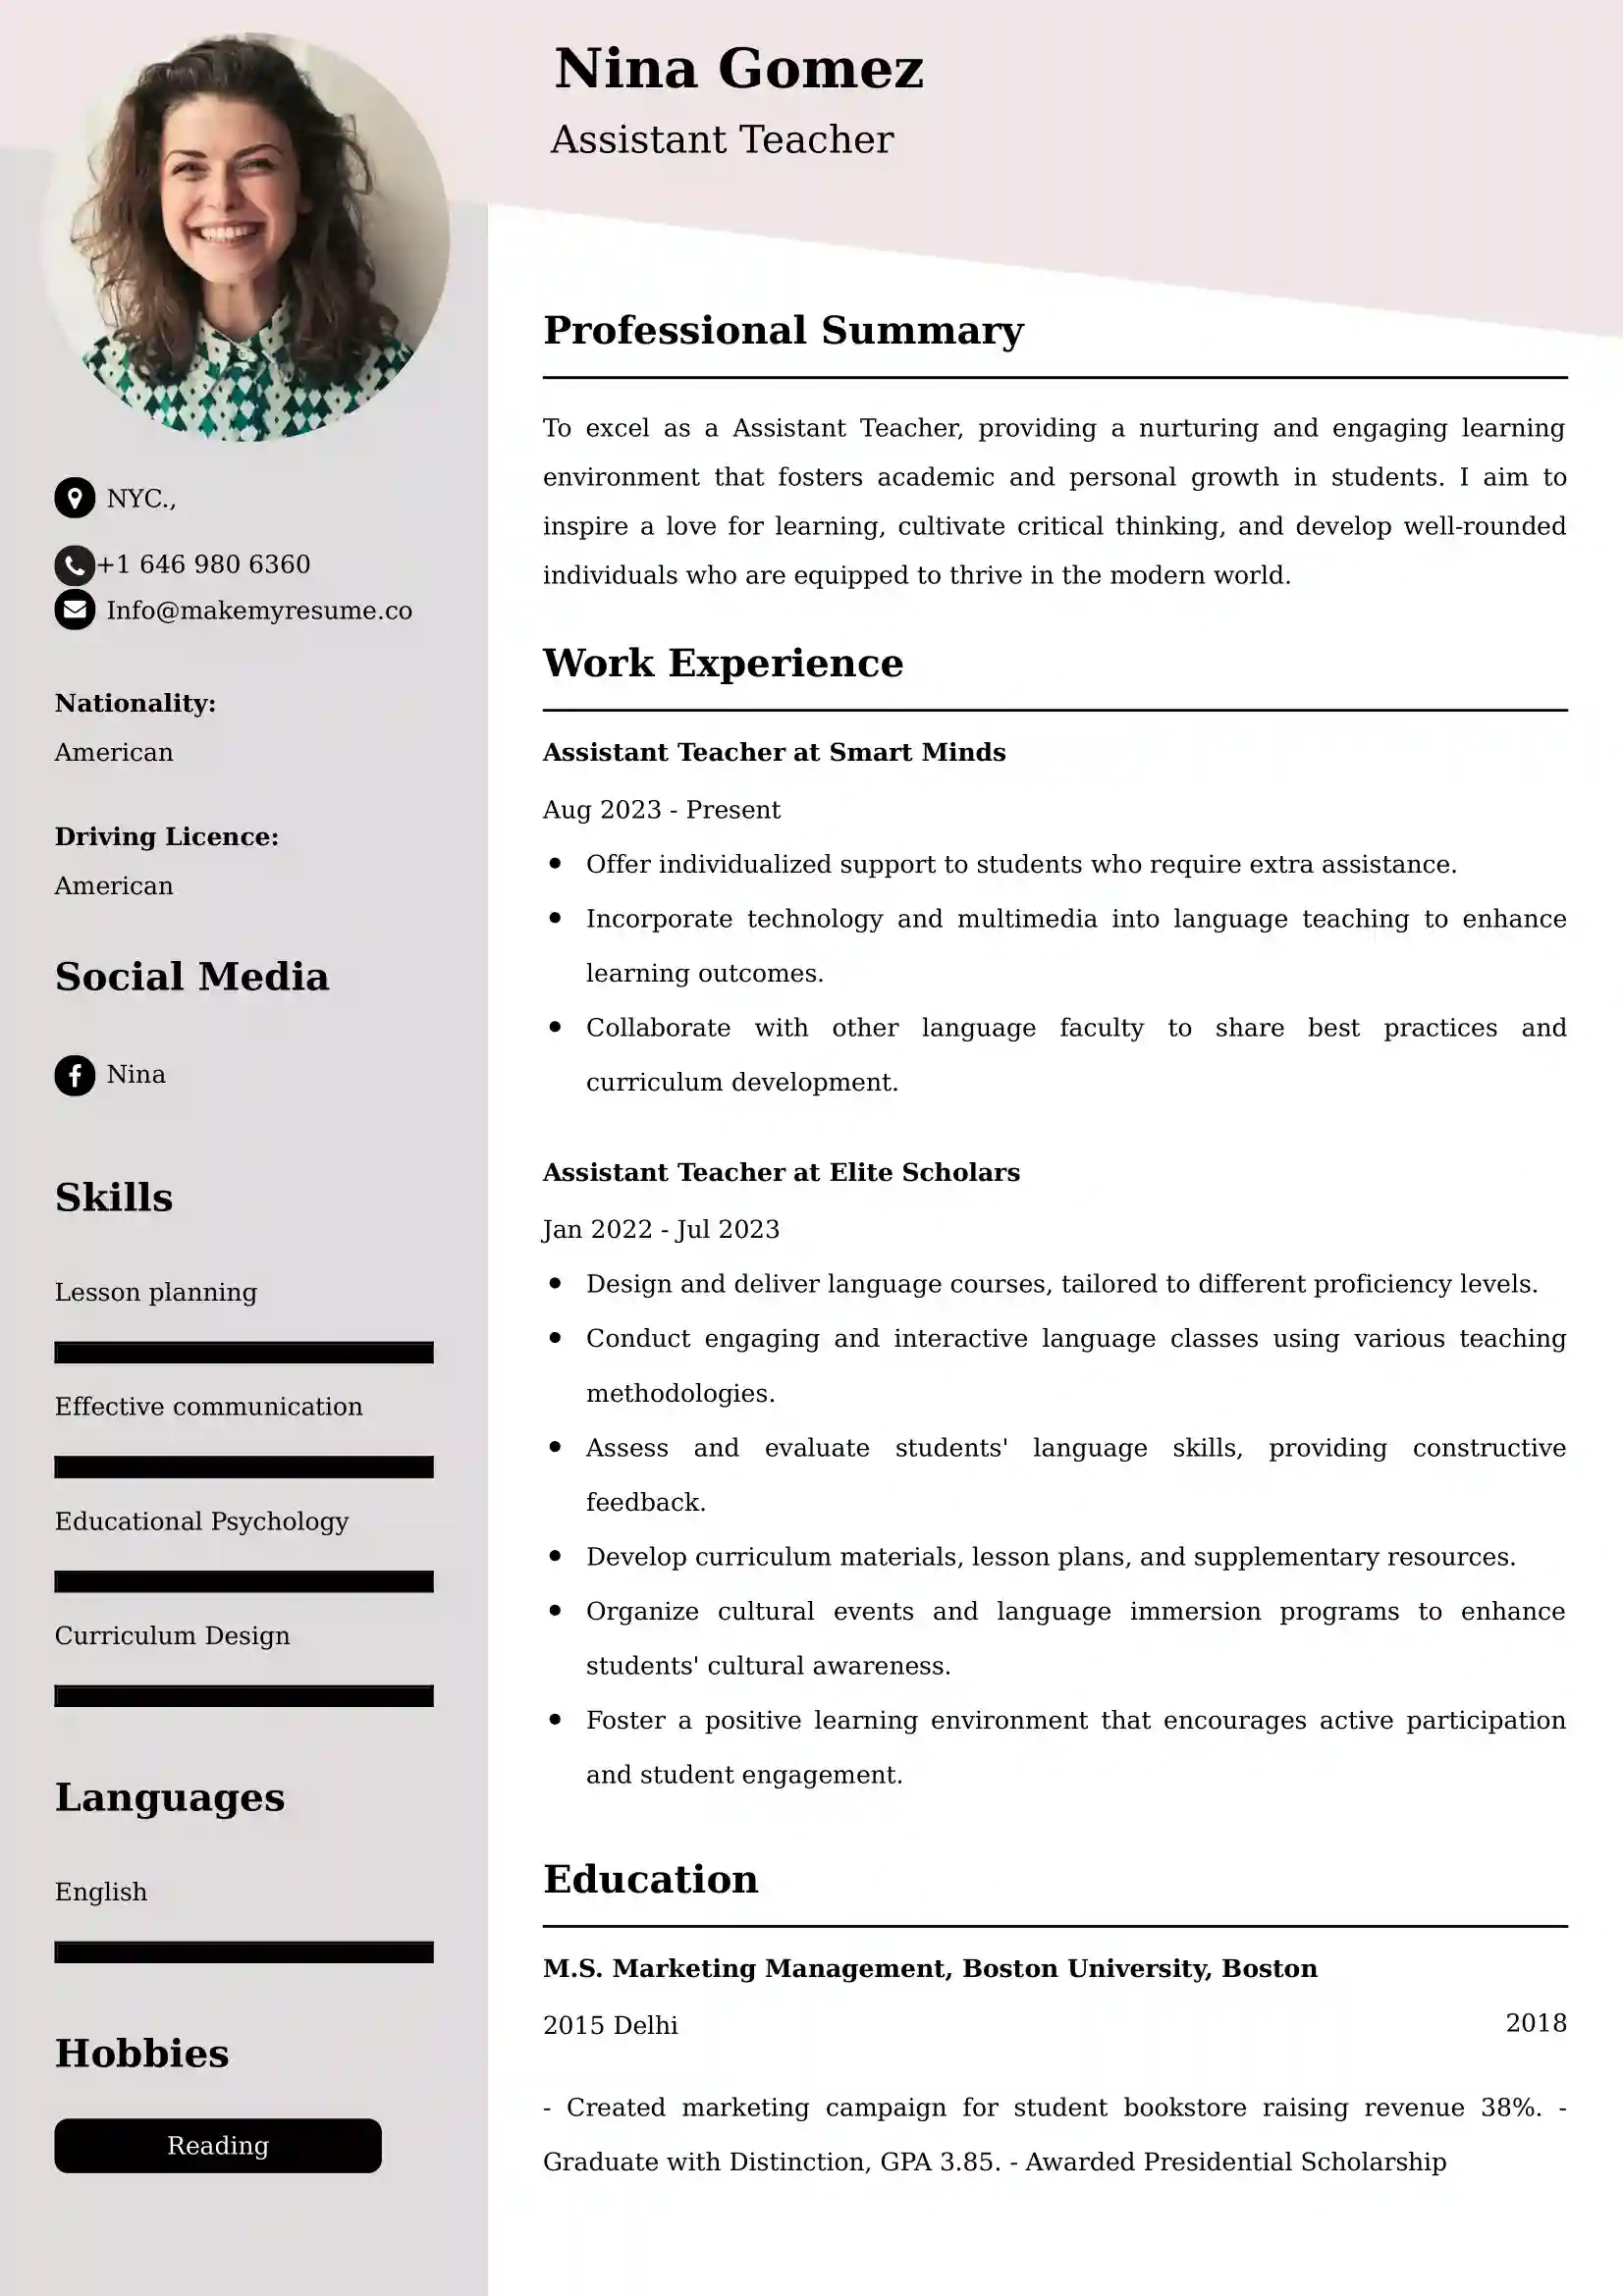 Assistant Teacher Resume Examples for UK Jobs - Tips and Guide